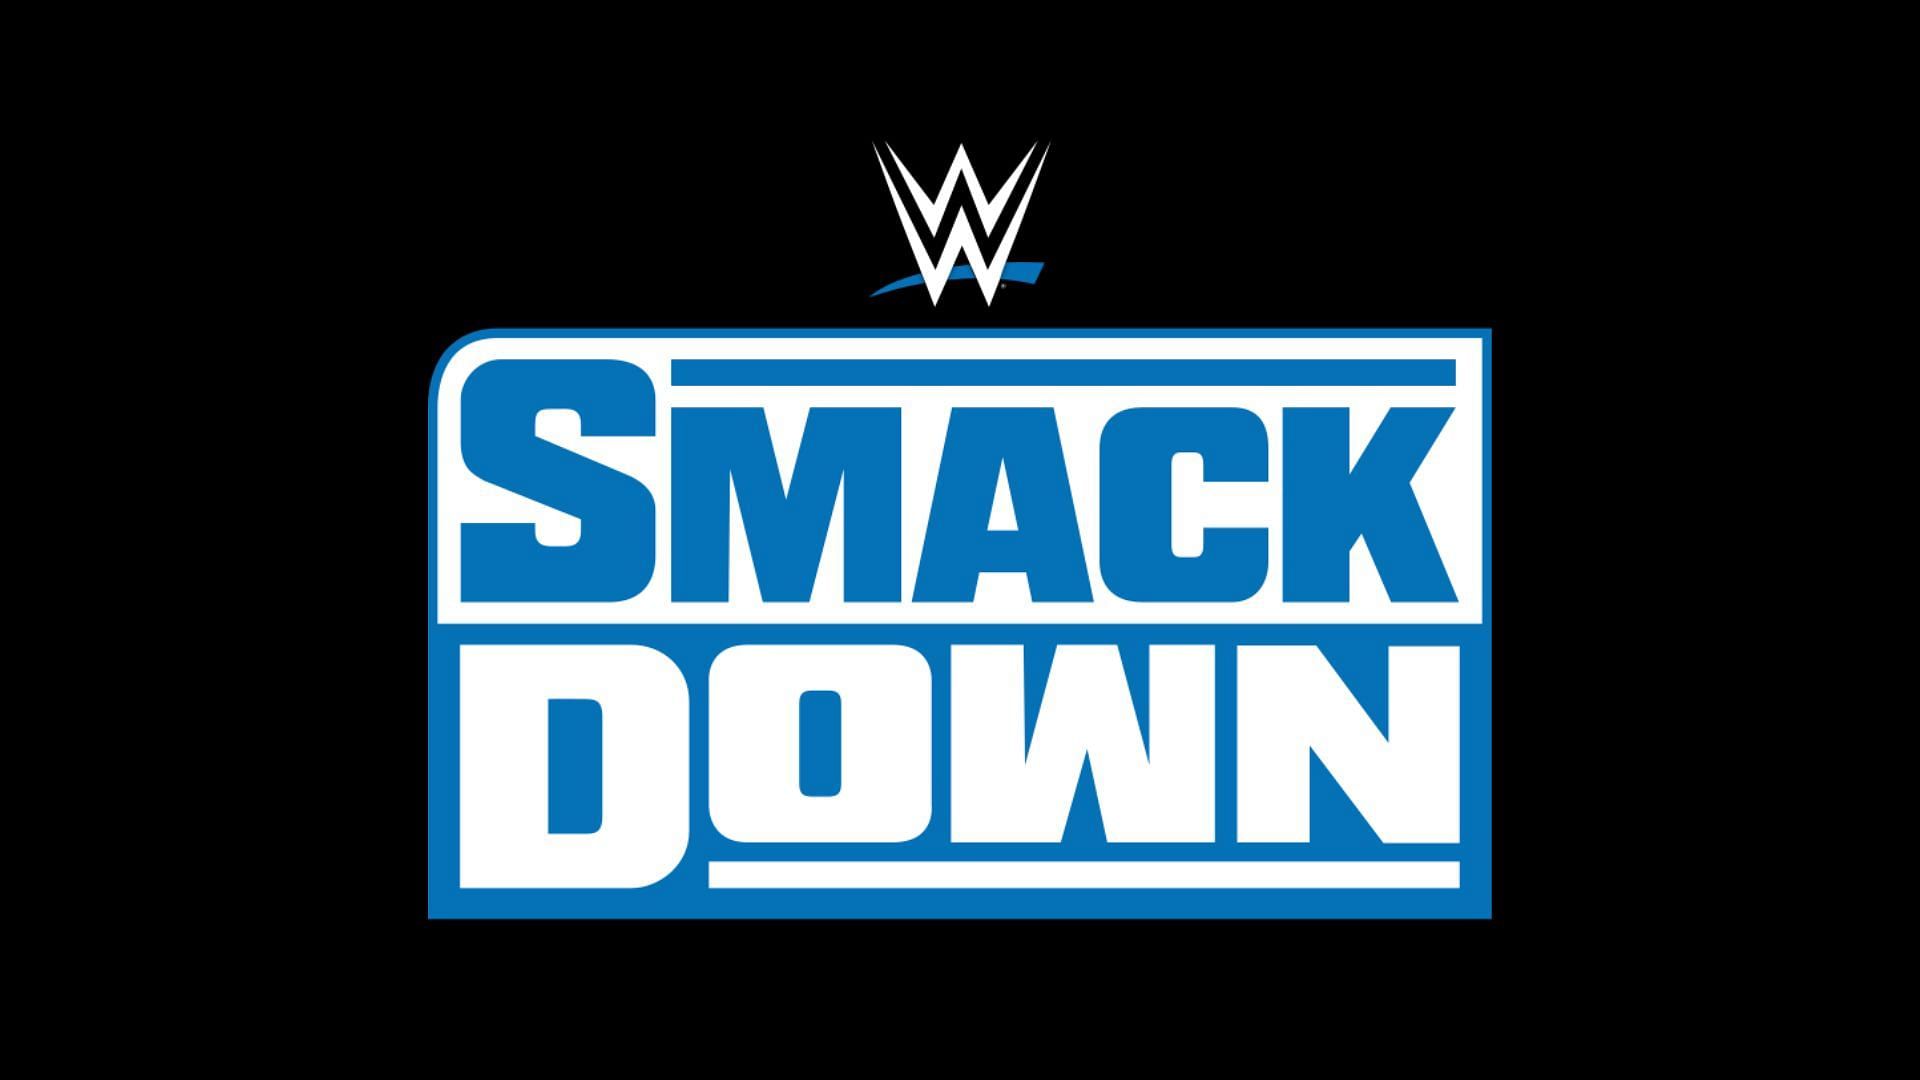 WWE SmackDown airs every Friday